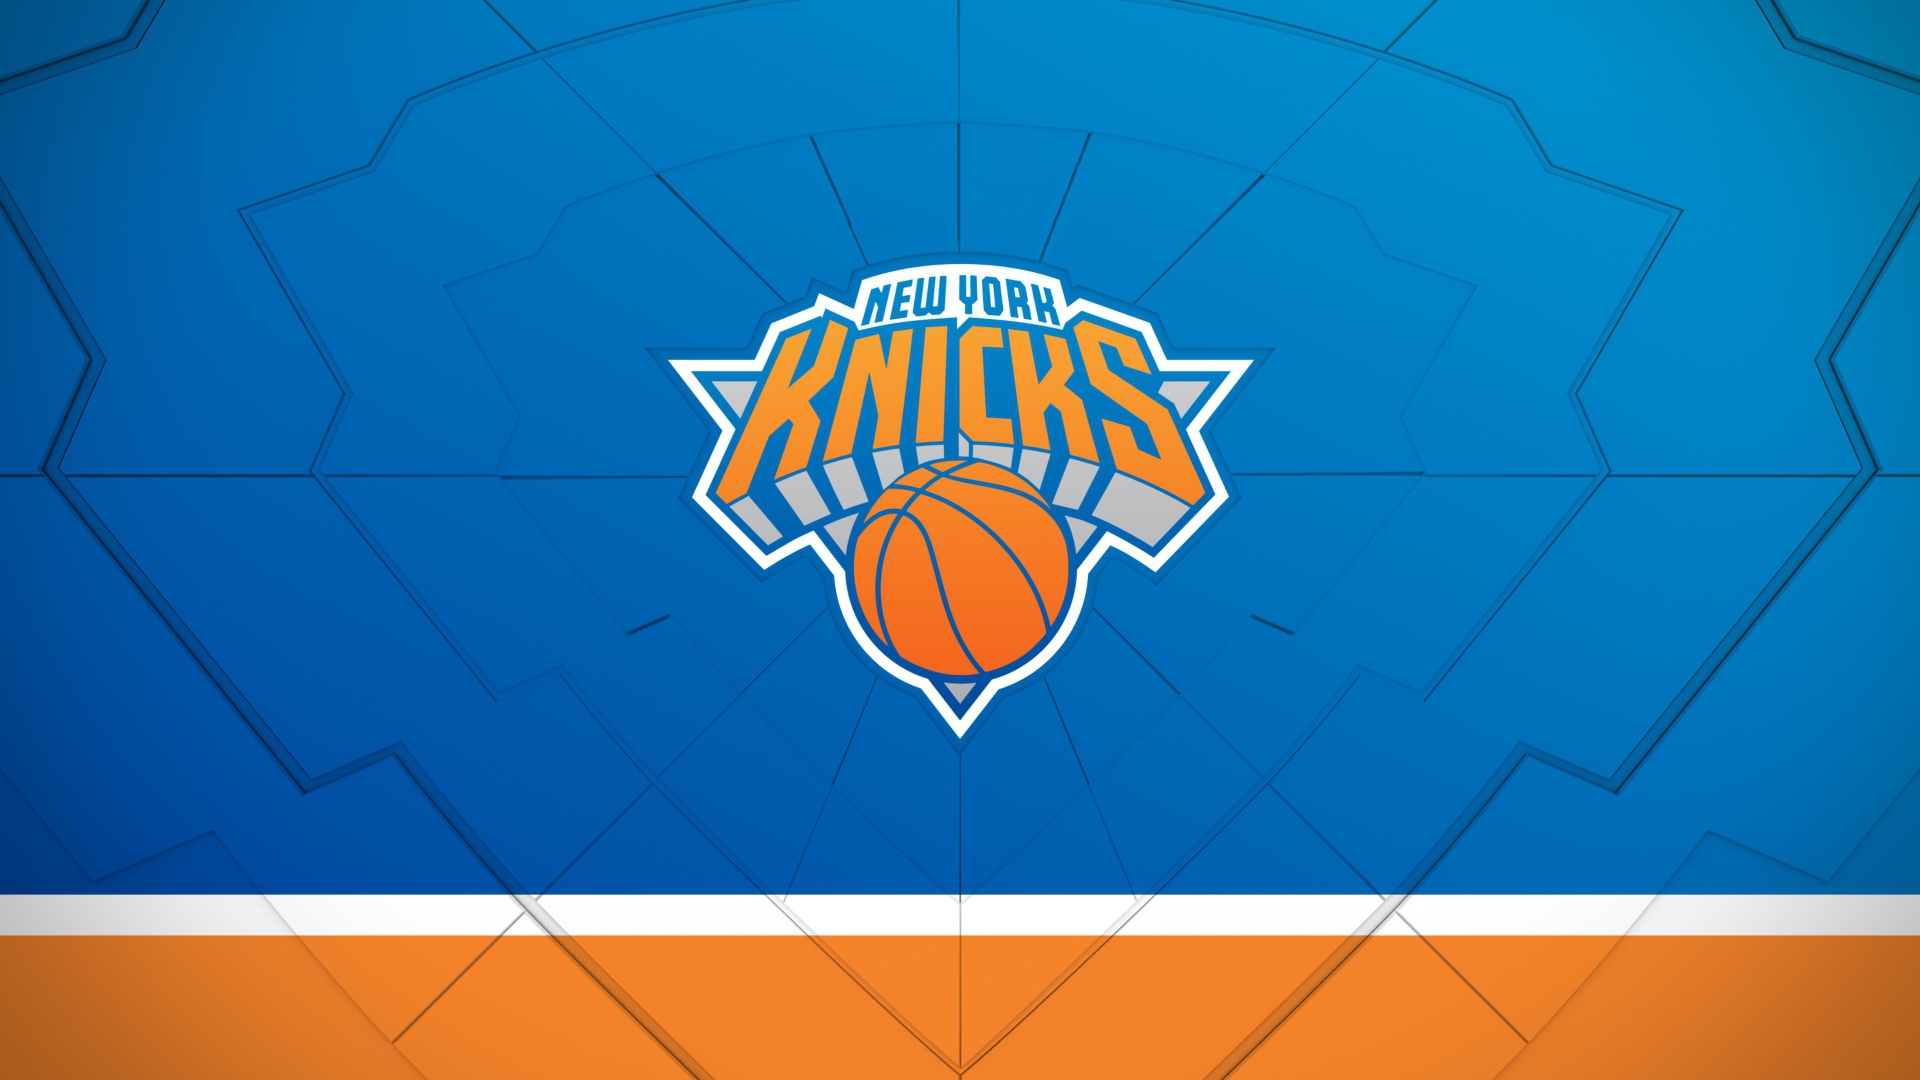 Westchester Knicks Wallpaper Image Photos Pictures